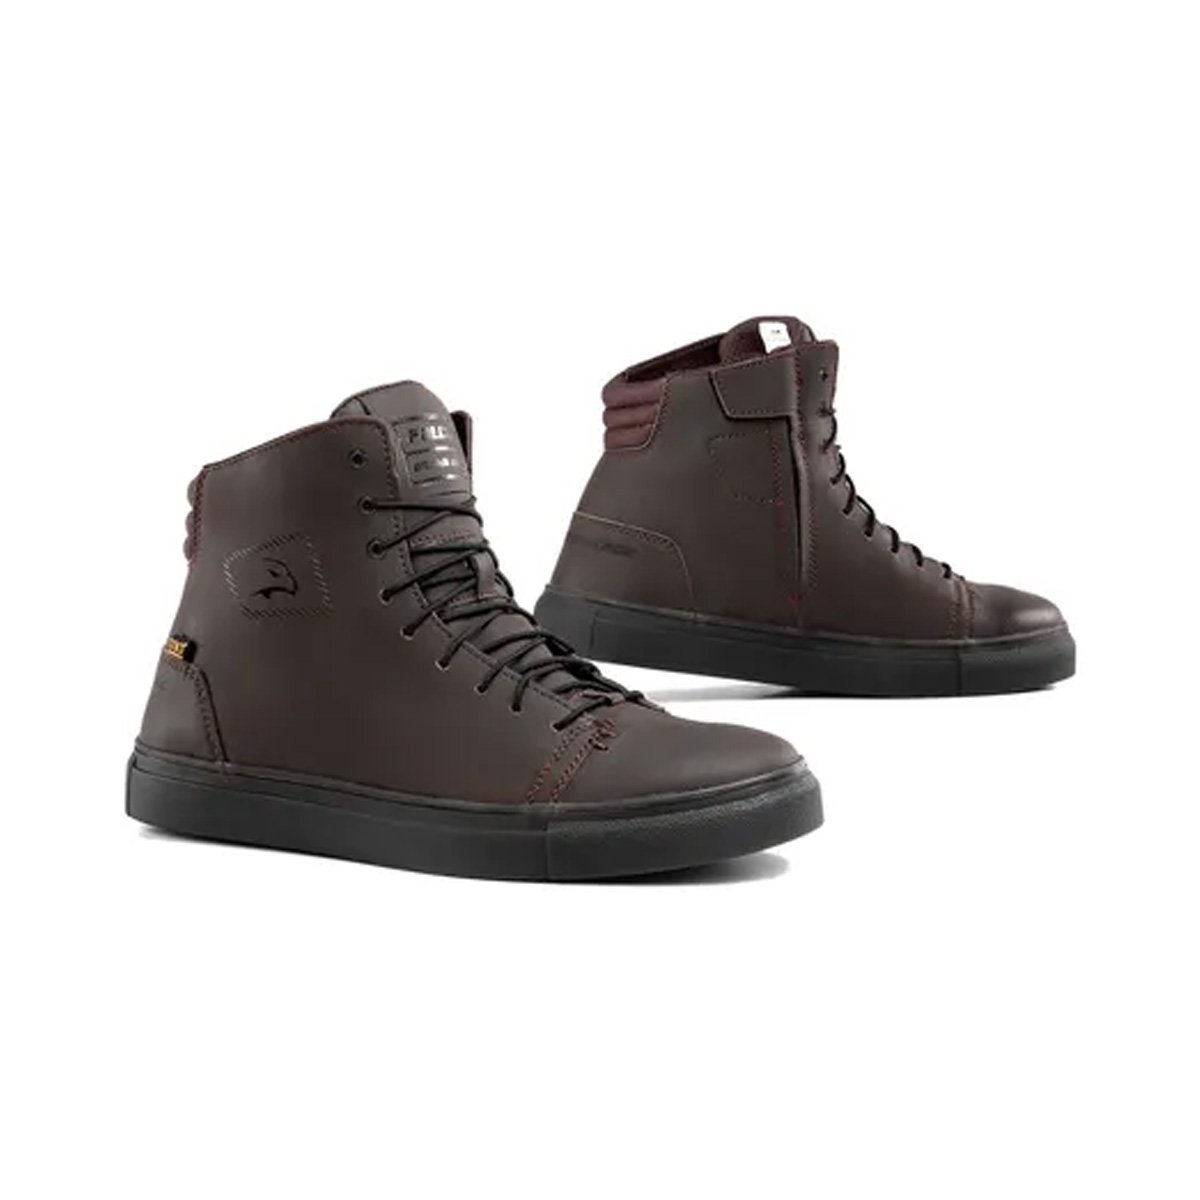 Image of Falco Nomad 2 Brown Size 47 ID 8052675494907